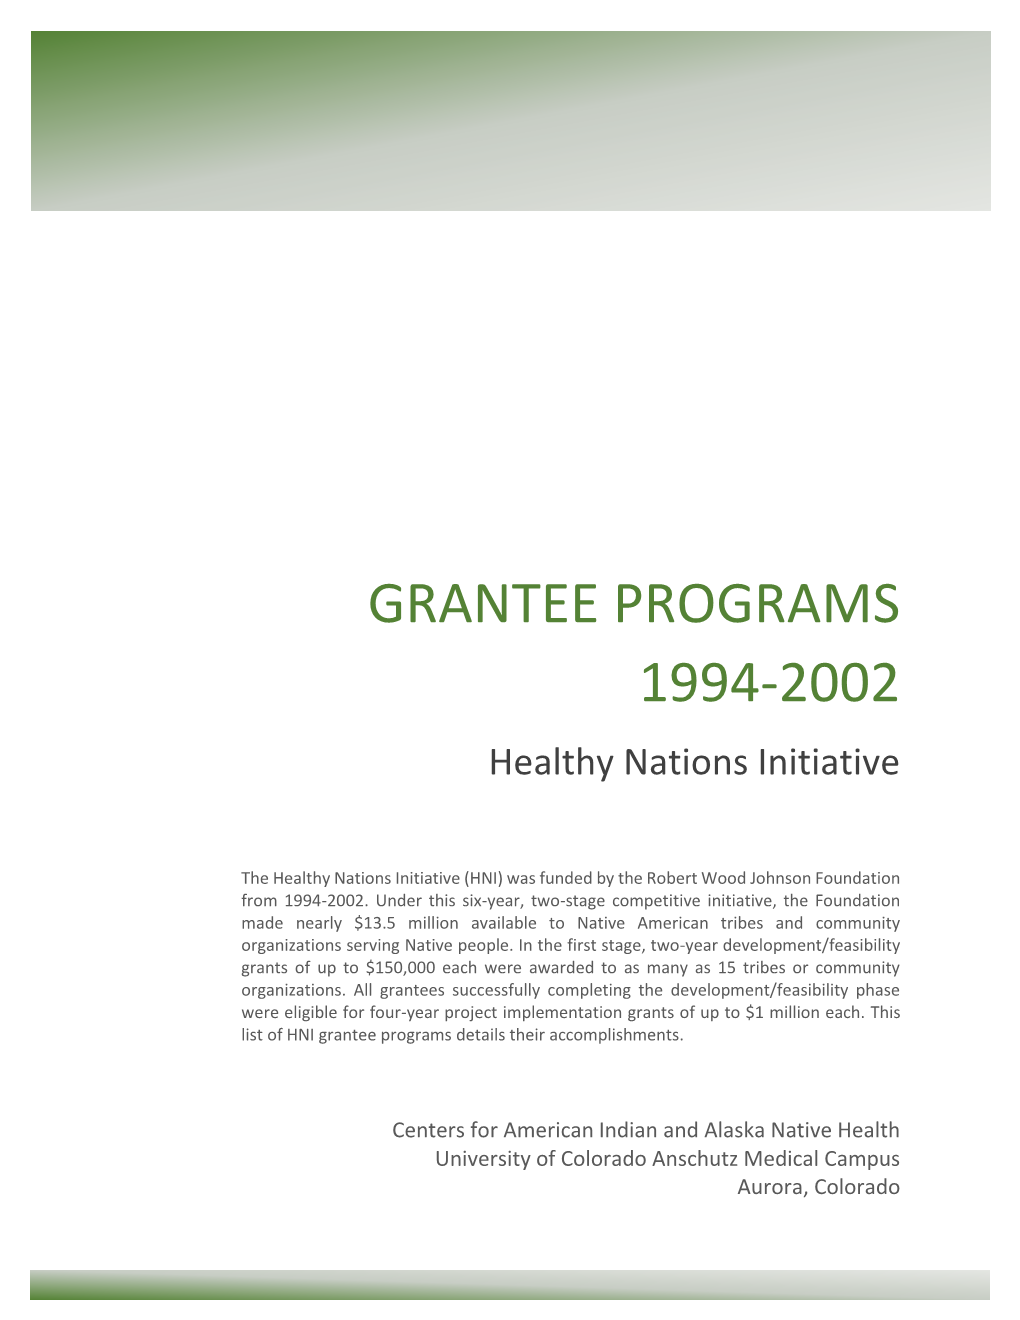 Healthy Nations Initiative